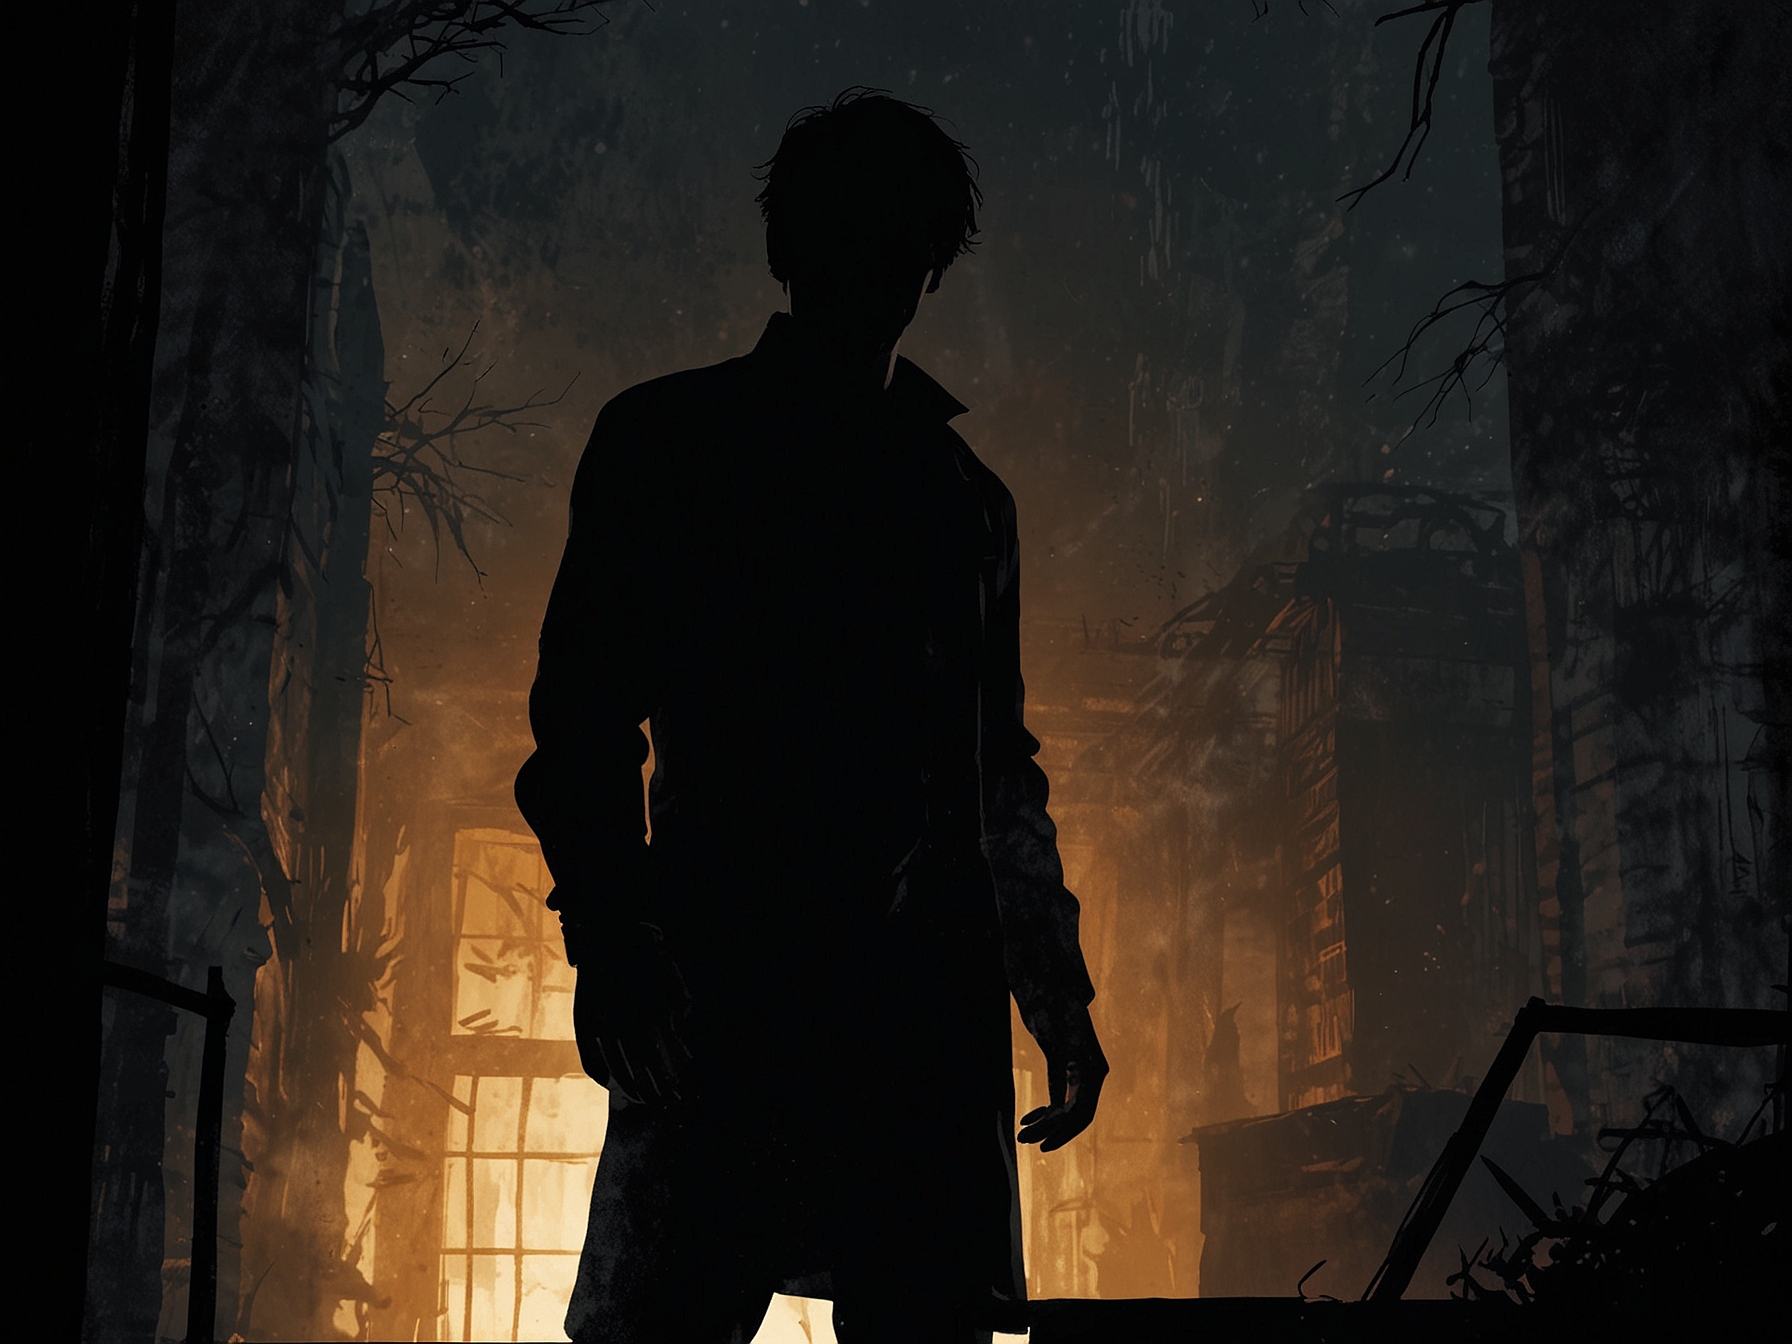 A dark, mysterious scene featuring the silhouette of a central character, with eerie lighting and a tense atmosphere, hinting at the film's blend of seduction and horror.